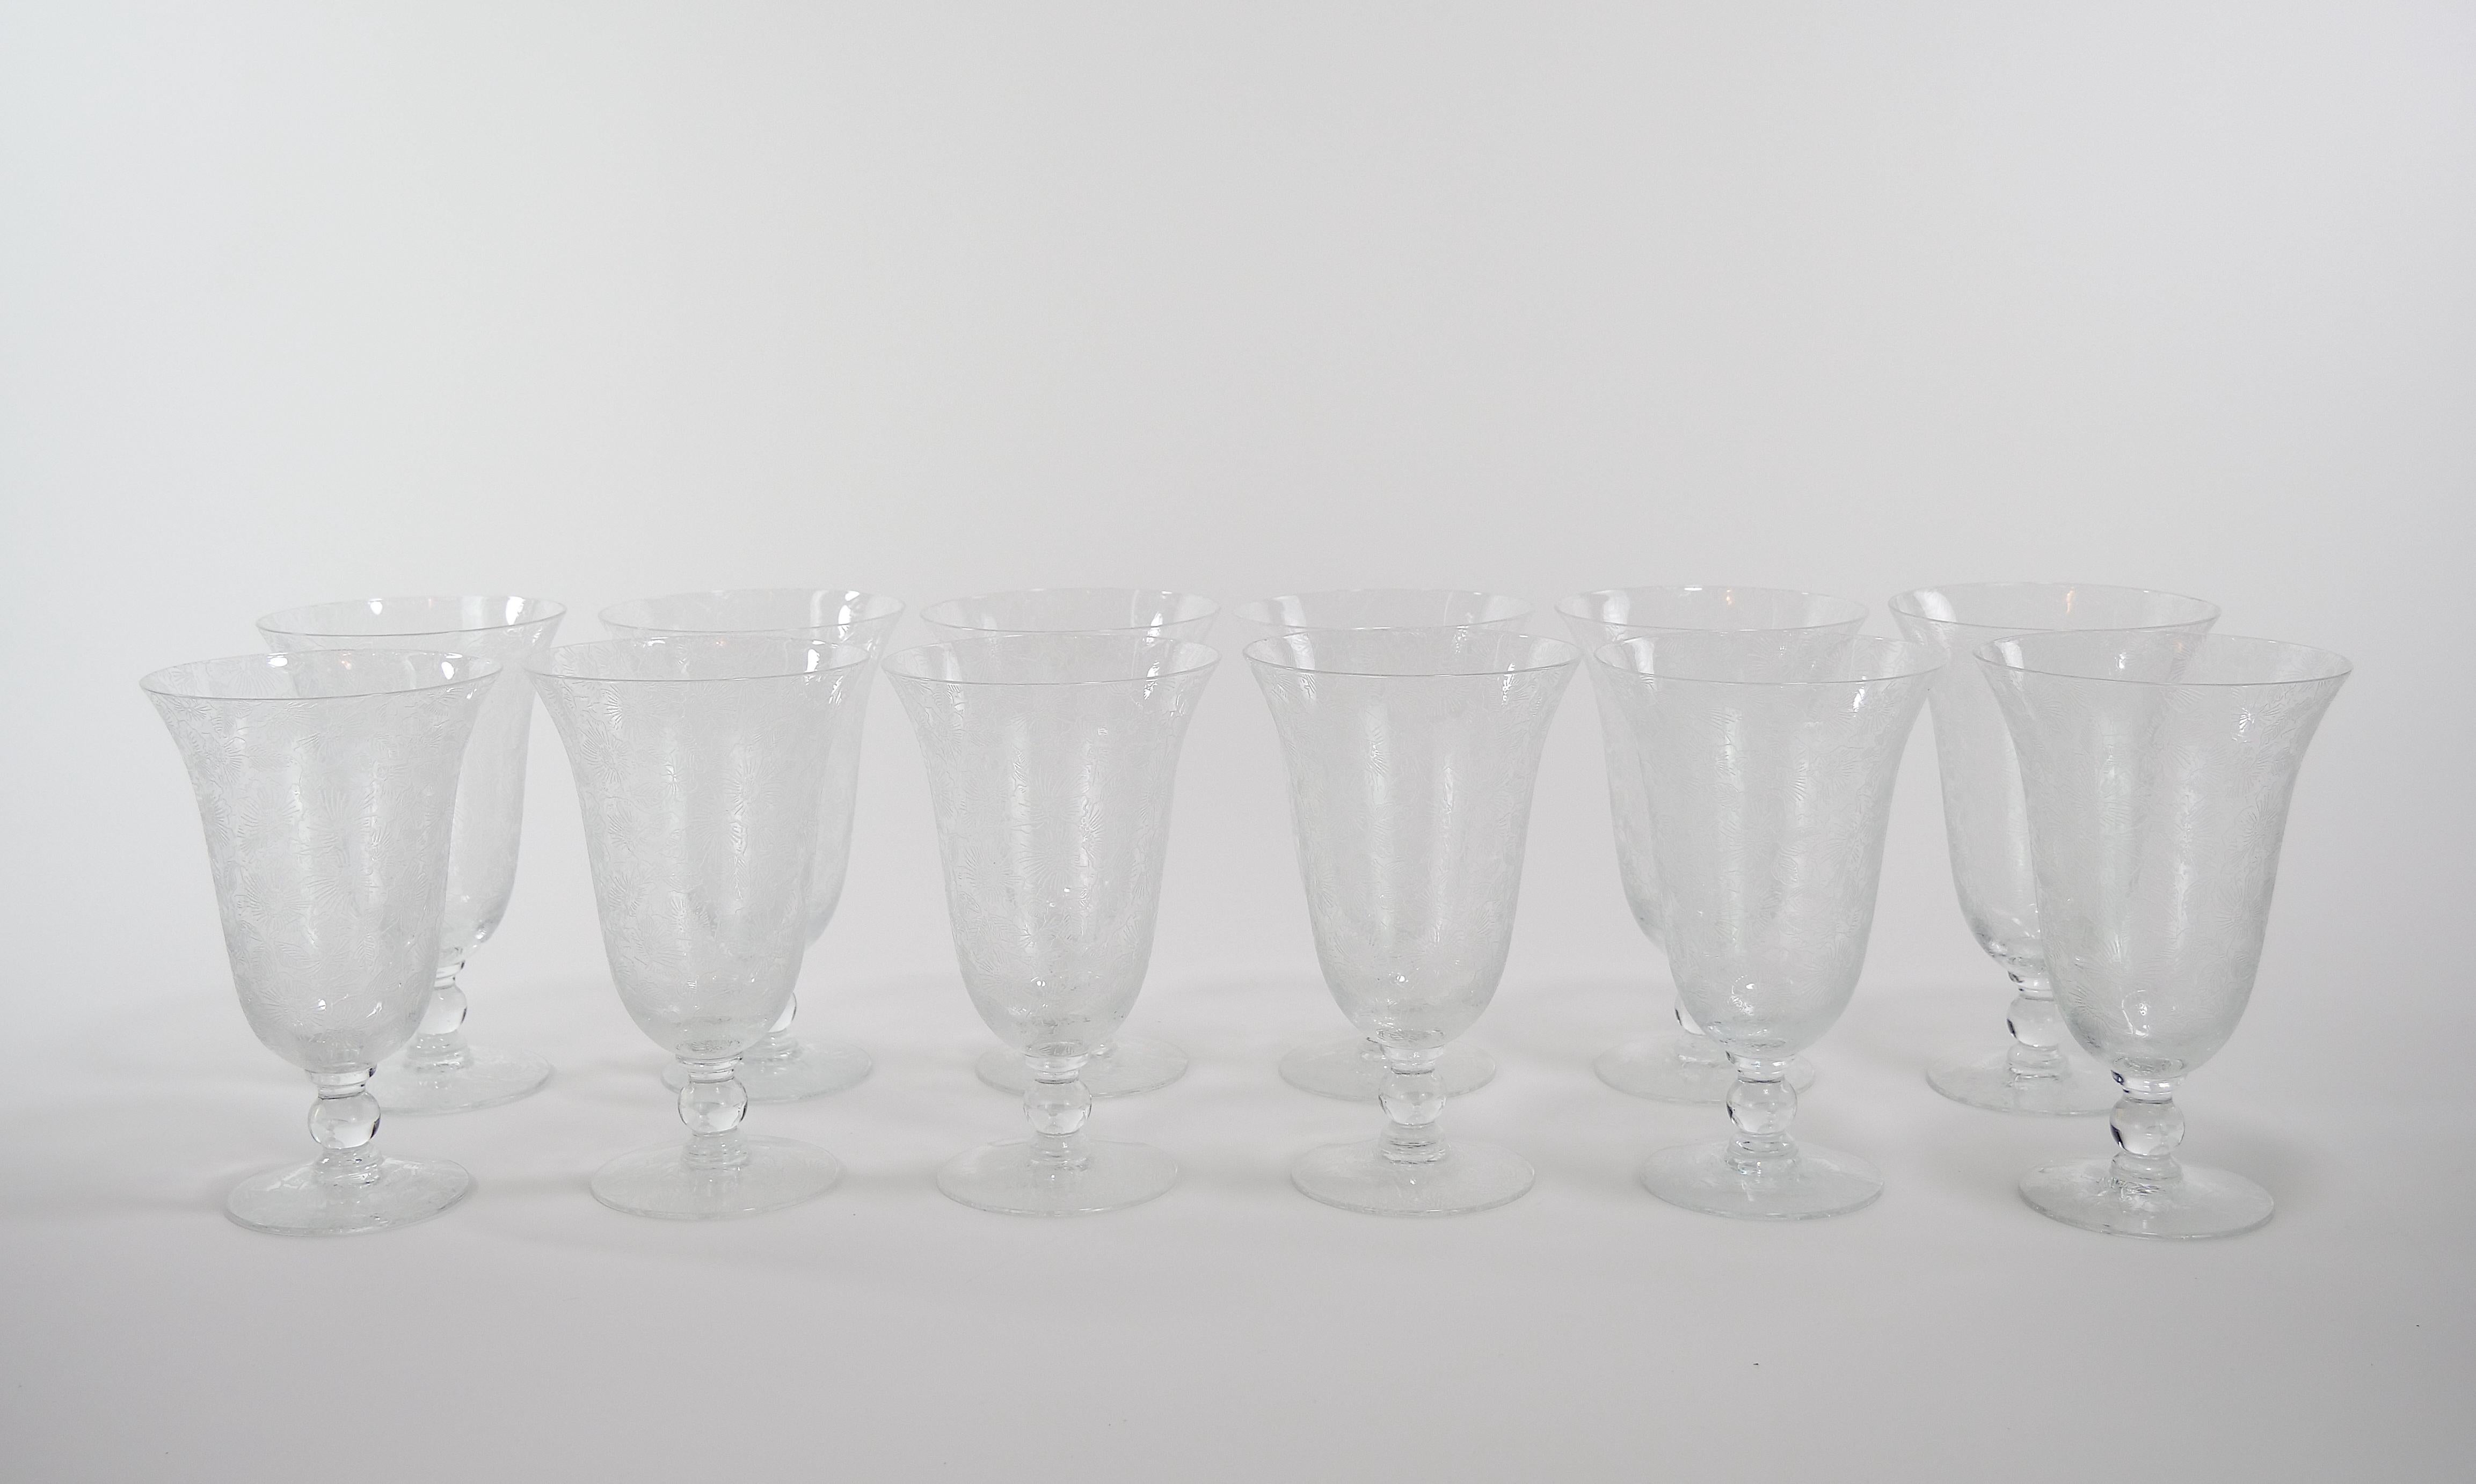 Mid 20th century beautifully hand etched exterior floral design barware / tableware glassware service for 12 people. Each glass is in great condition. Each one measures 6.75 inches high and 4 inches top diameter, base is 3 inches diameter.